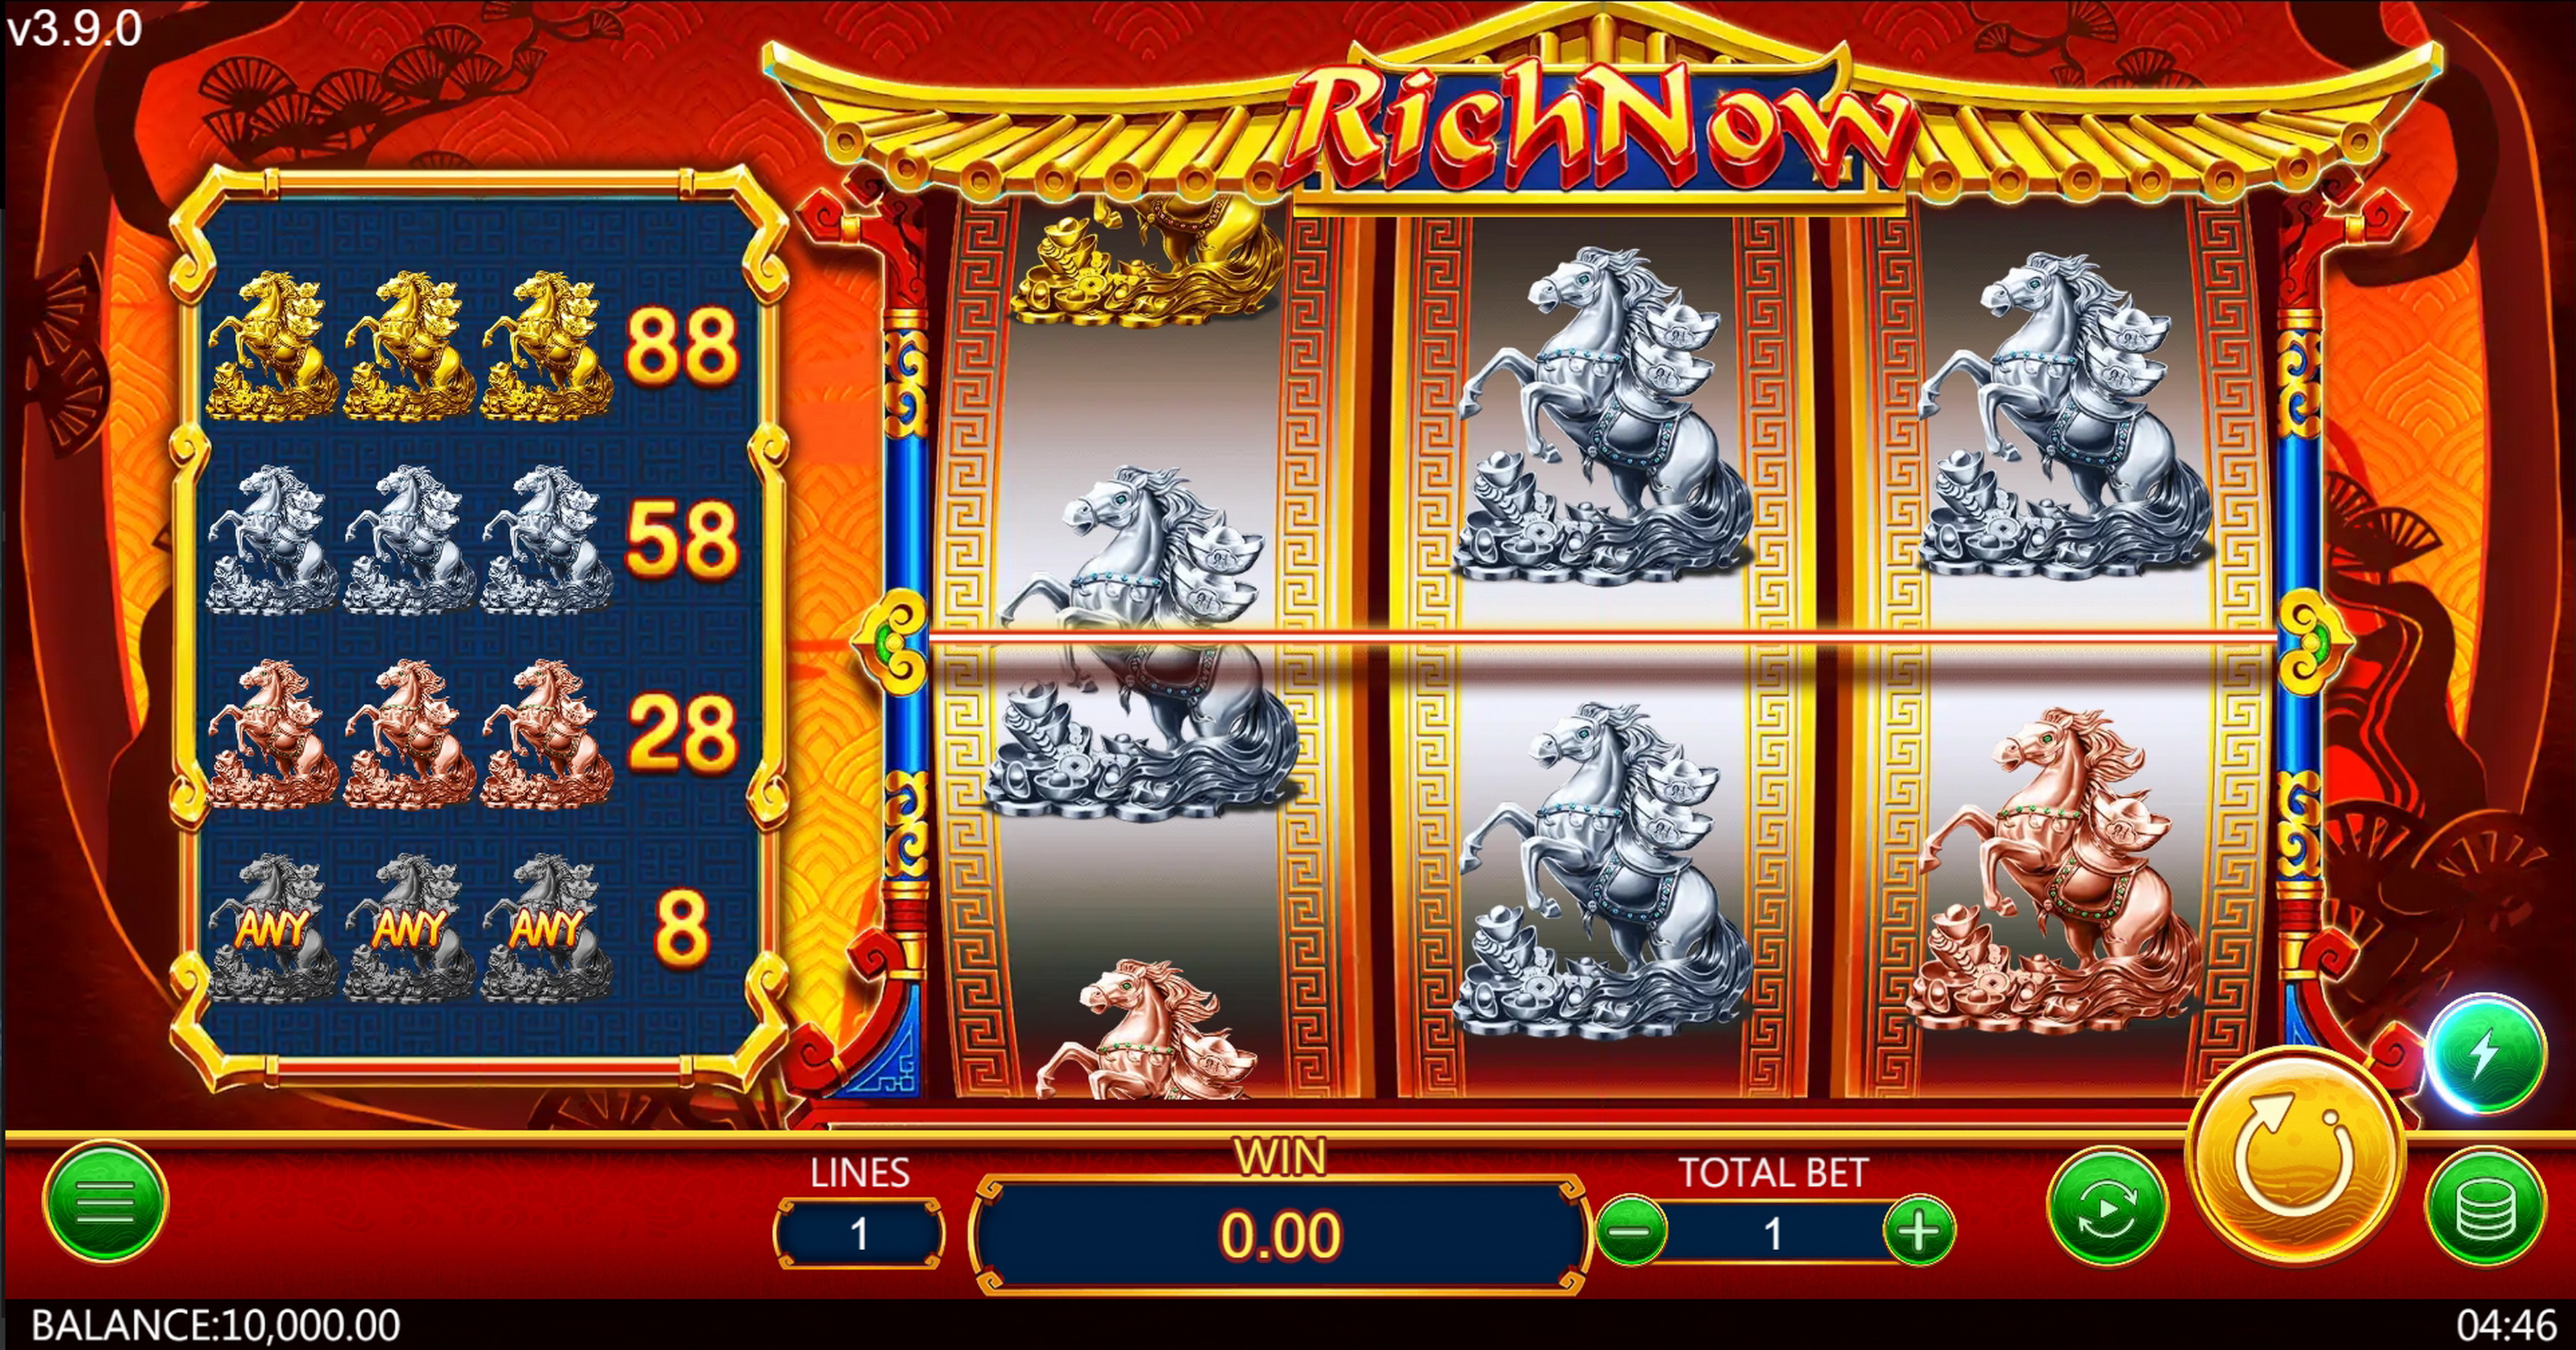 Reels in Rich now Slot Game by Dragoon Soft